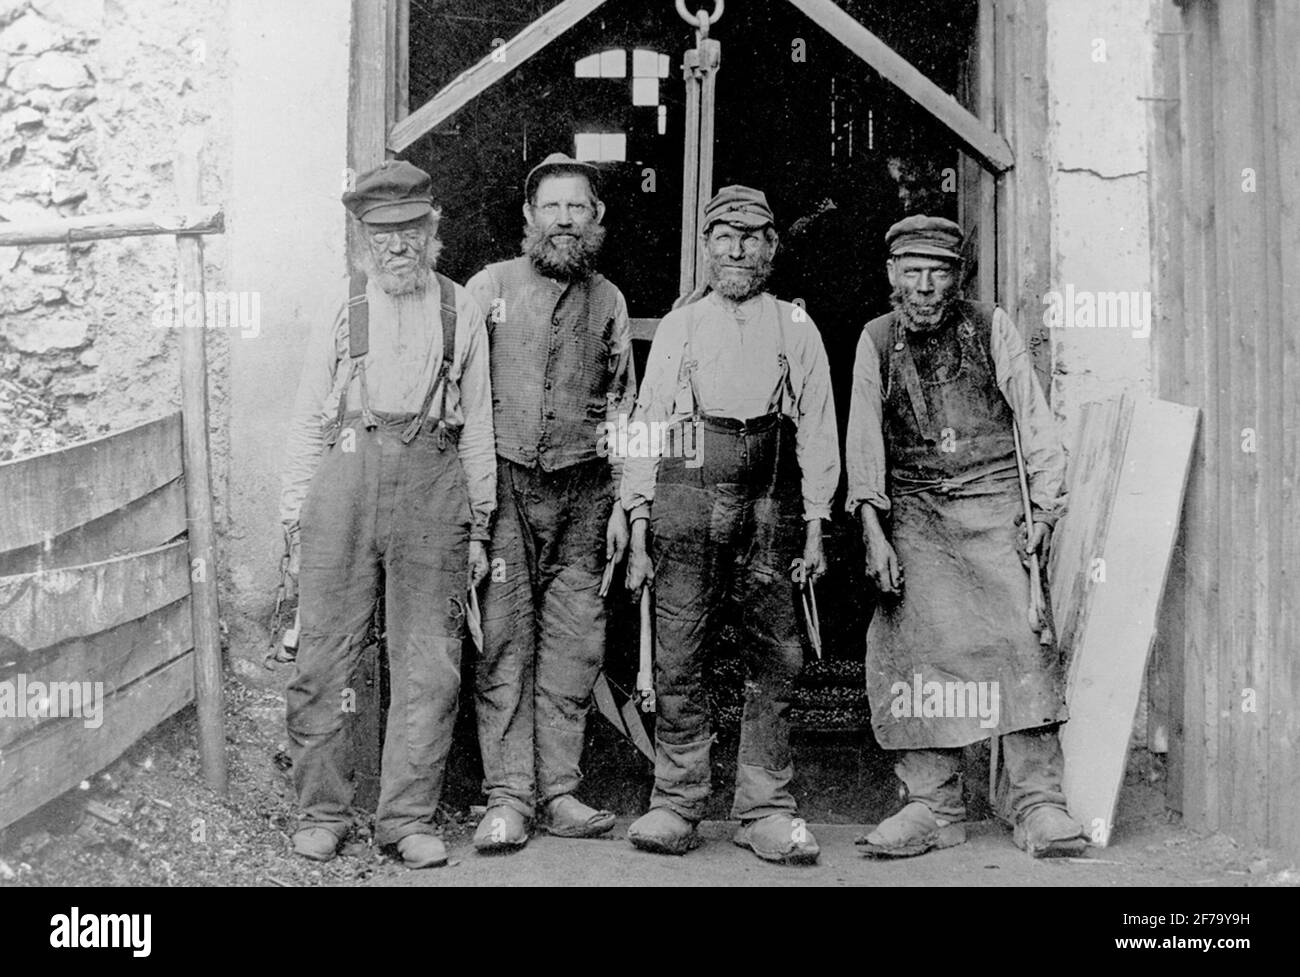 Hagge ironworks.The last nailed products at Hagge Bruk, 1895. From left: Olof Chef (14/1 1821 - 1900) Magnus Wiksten (3/7 1837 - 14/5 1925) Gustav Backström (3/7 1830 - 14/9 1919 ) and Erik Lindkvist (20/11 1835 - 14/9 1914) .Photographer: Probably the Cape. Stock Photo